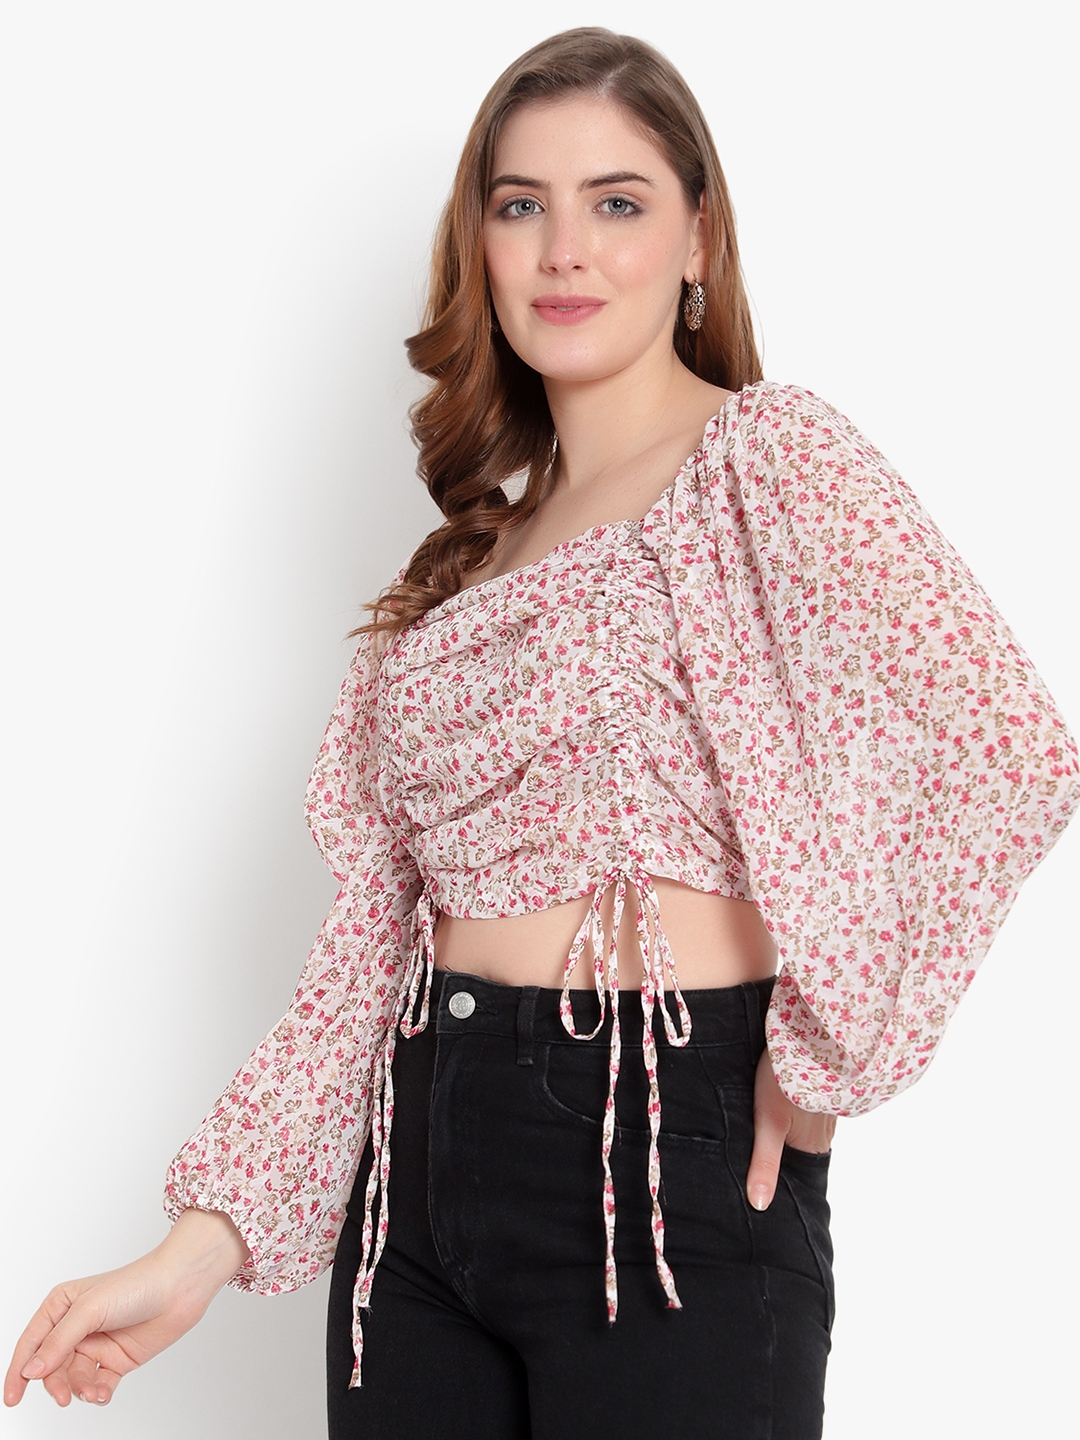 ANKLES Casual Solid White Multi Color Puffed Sleeves Crop Top 